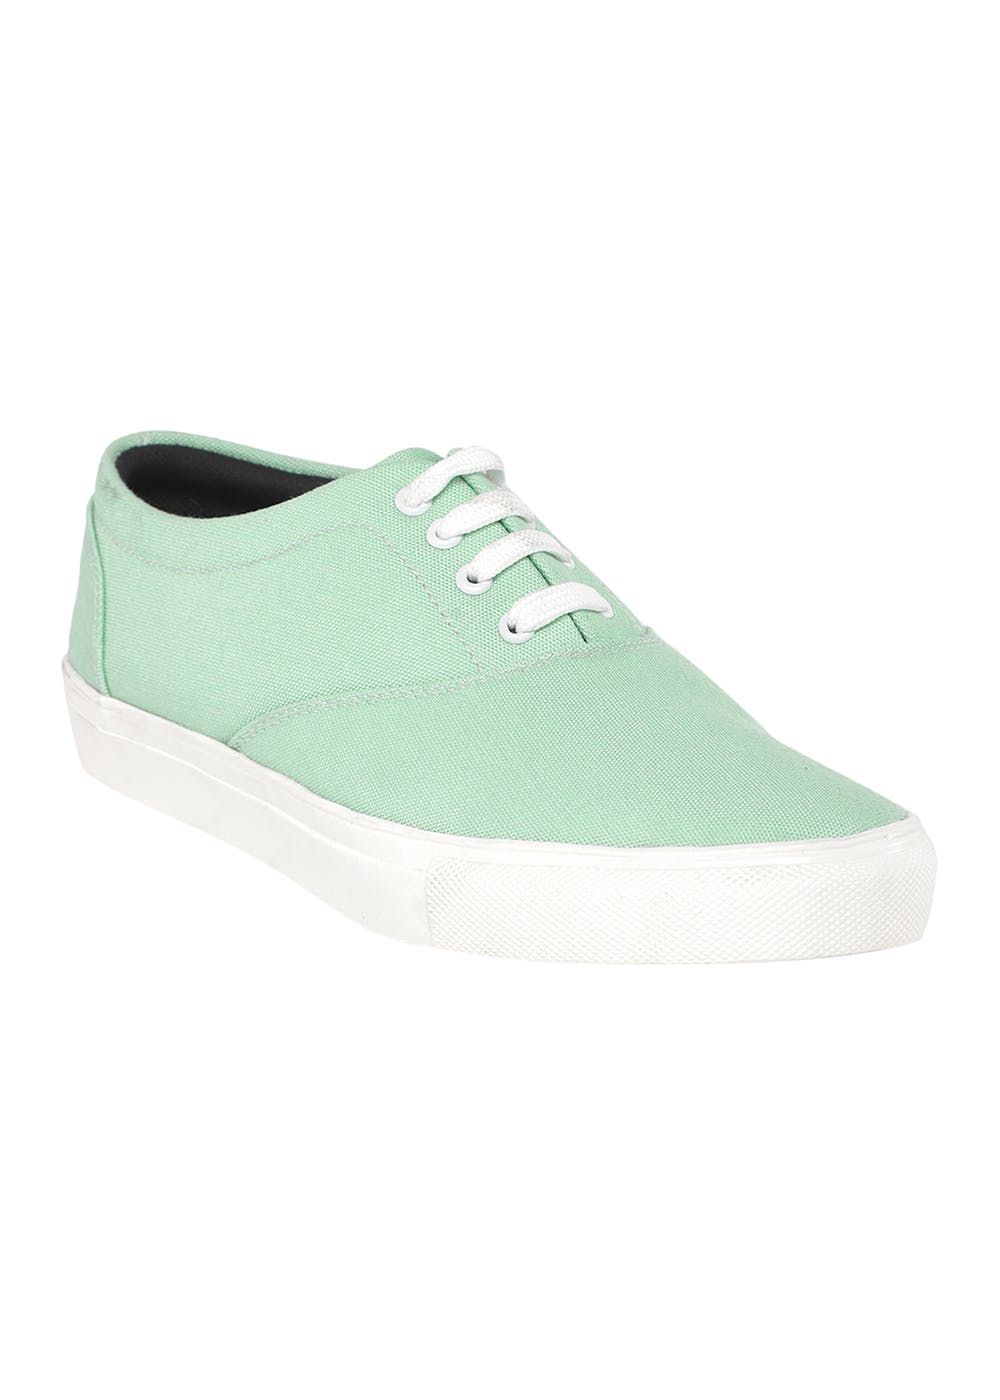 Get Classic Mint Green Canvas Sneakers at ₹ 1199 | LBB Shop